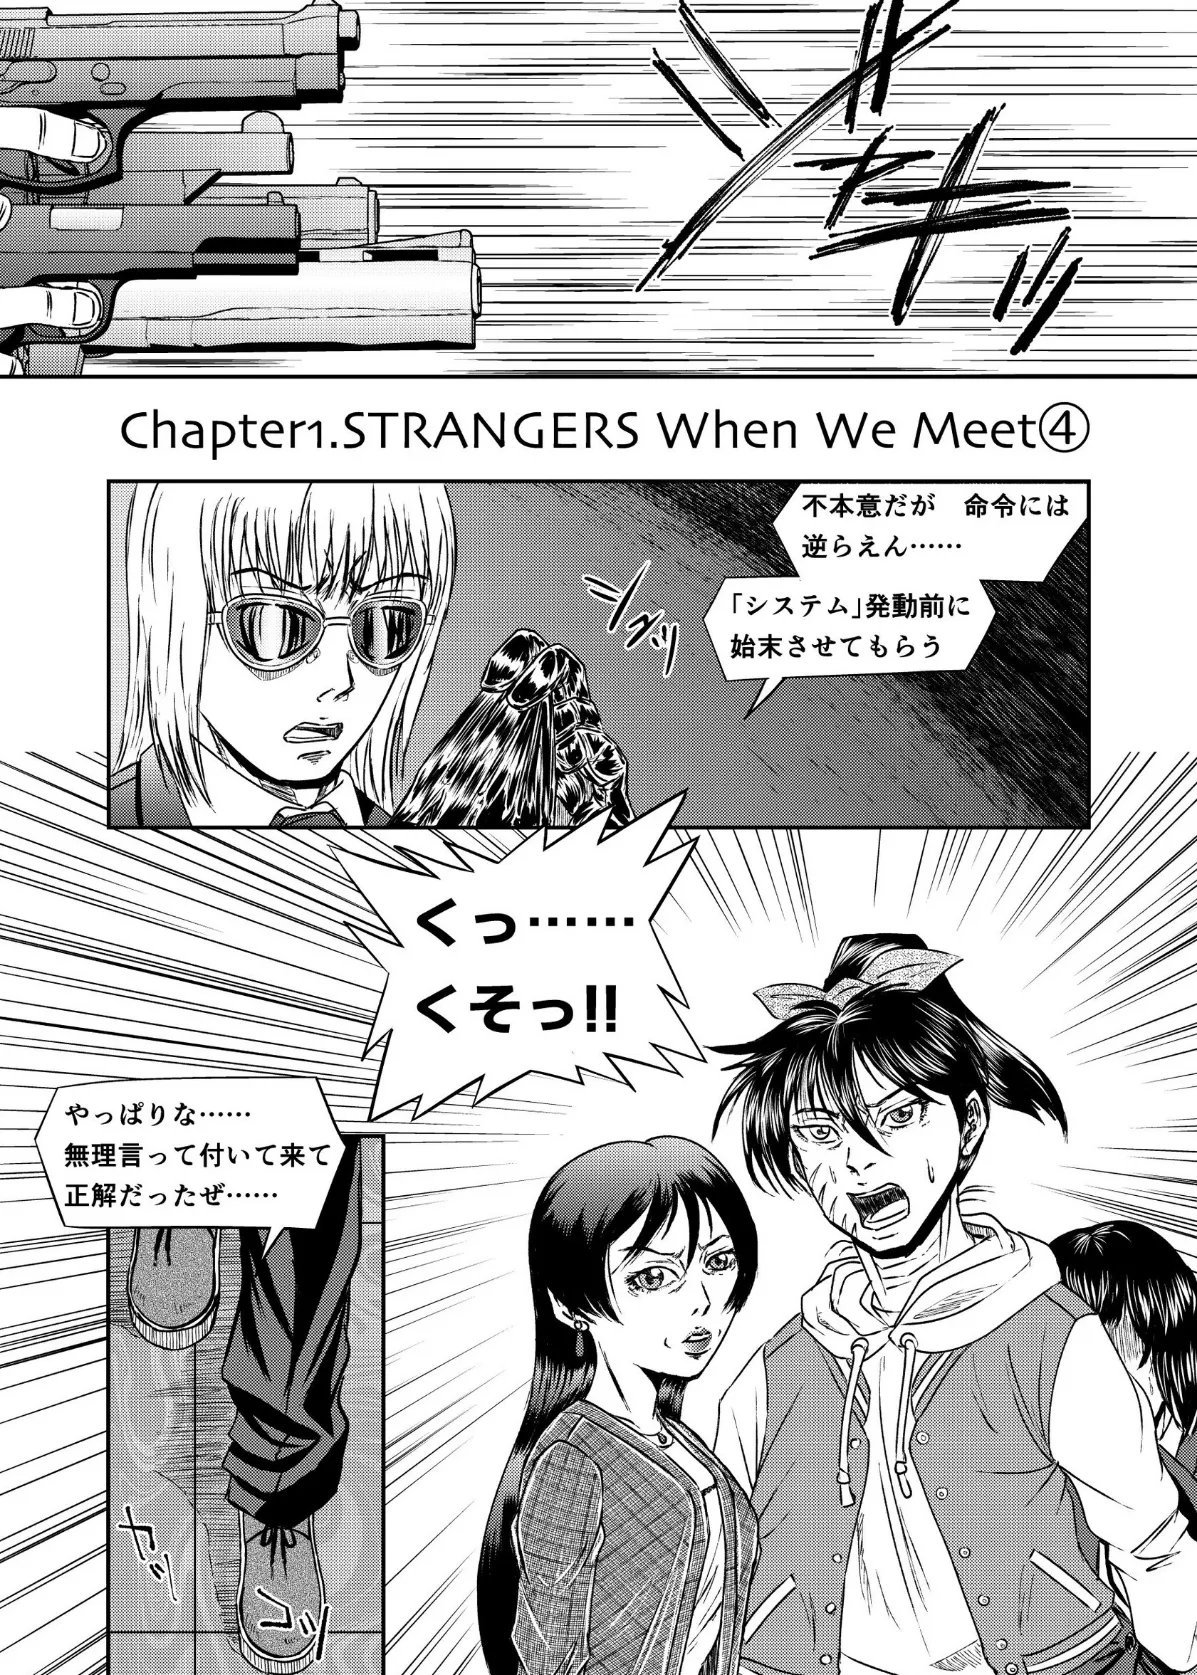 XENON REBOOT＜BASED STORY ON ’BIO DIVER XENON’＞【分冊版】 Chapter1 STRANGERS When We Meet（4） 5ページ